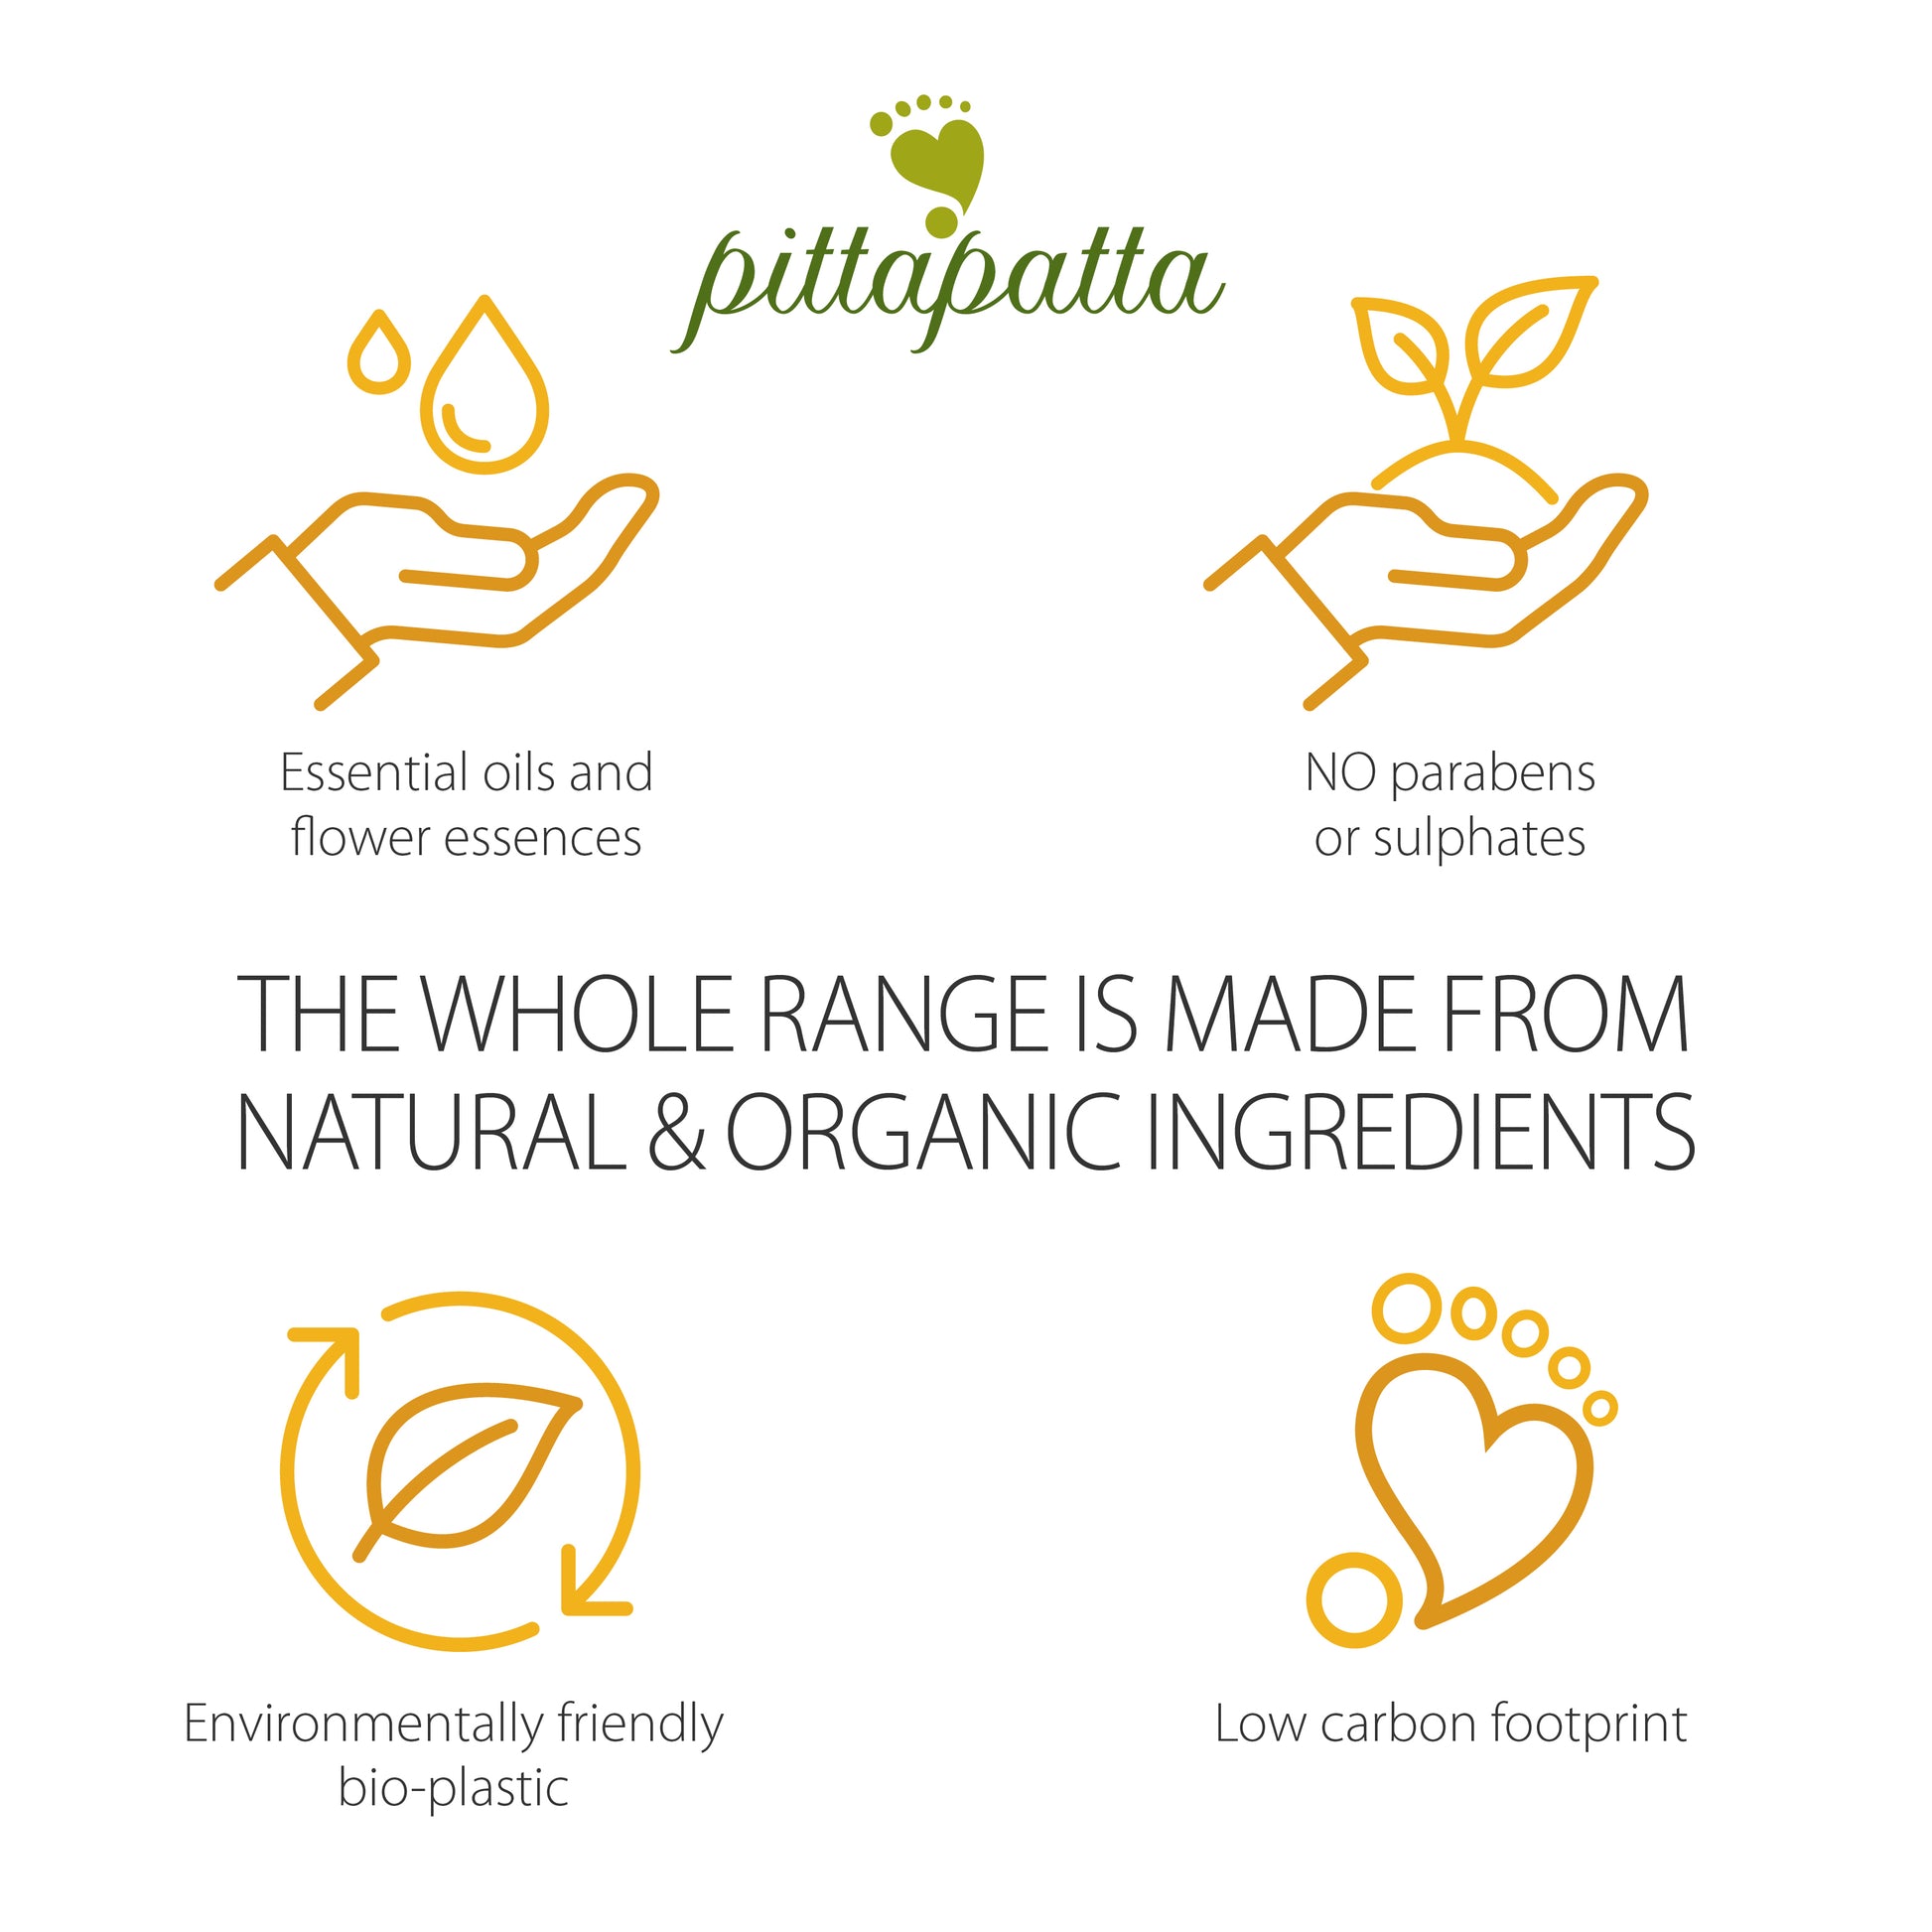 Pittapatta Shampoo & Bodywash is made from natural and organic ingredients and infused with organic essential oils and flower essences designed to be gentle and a joy to use.